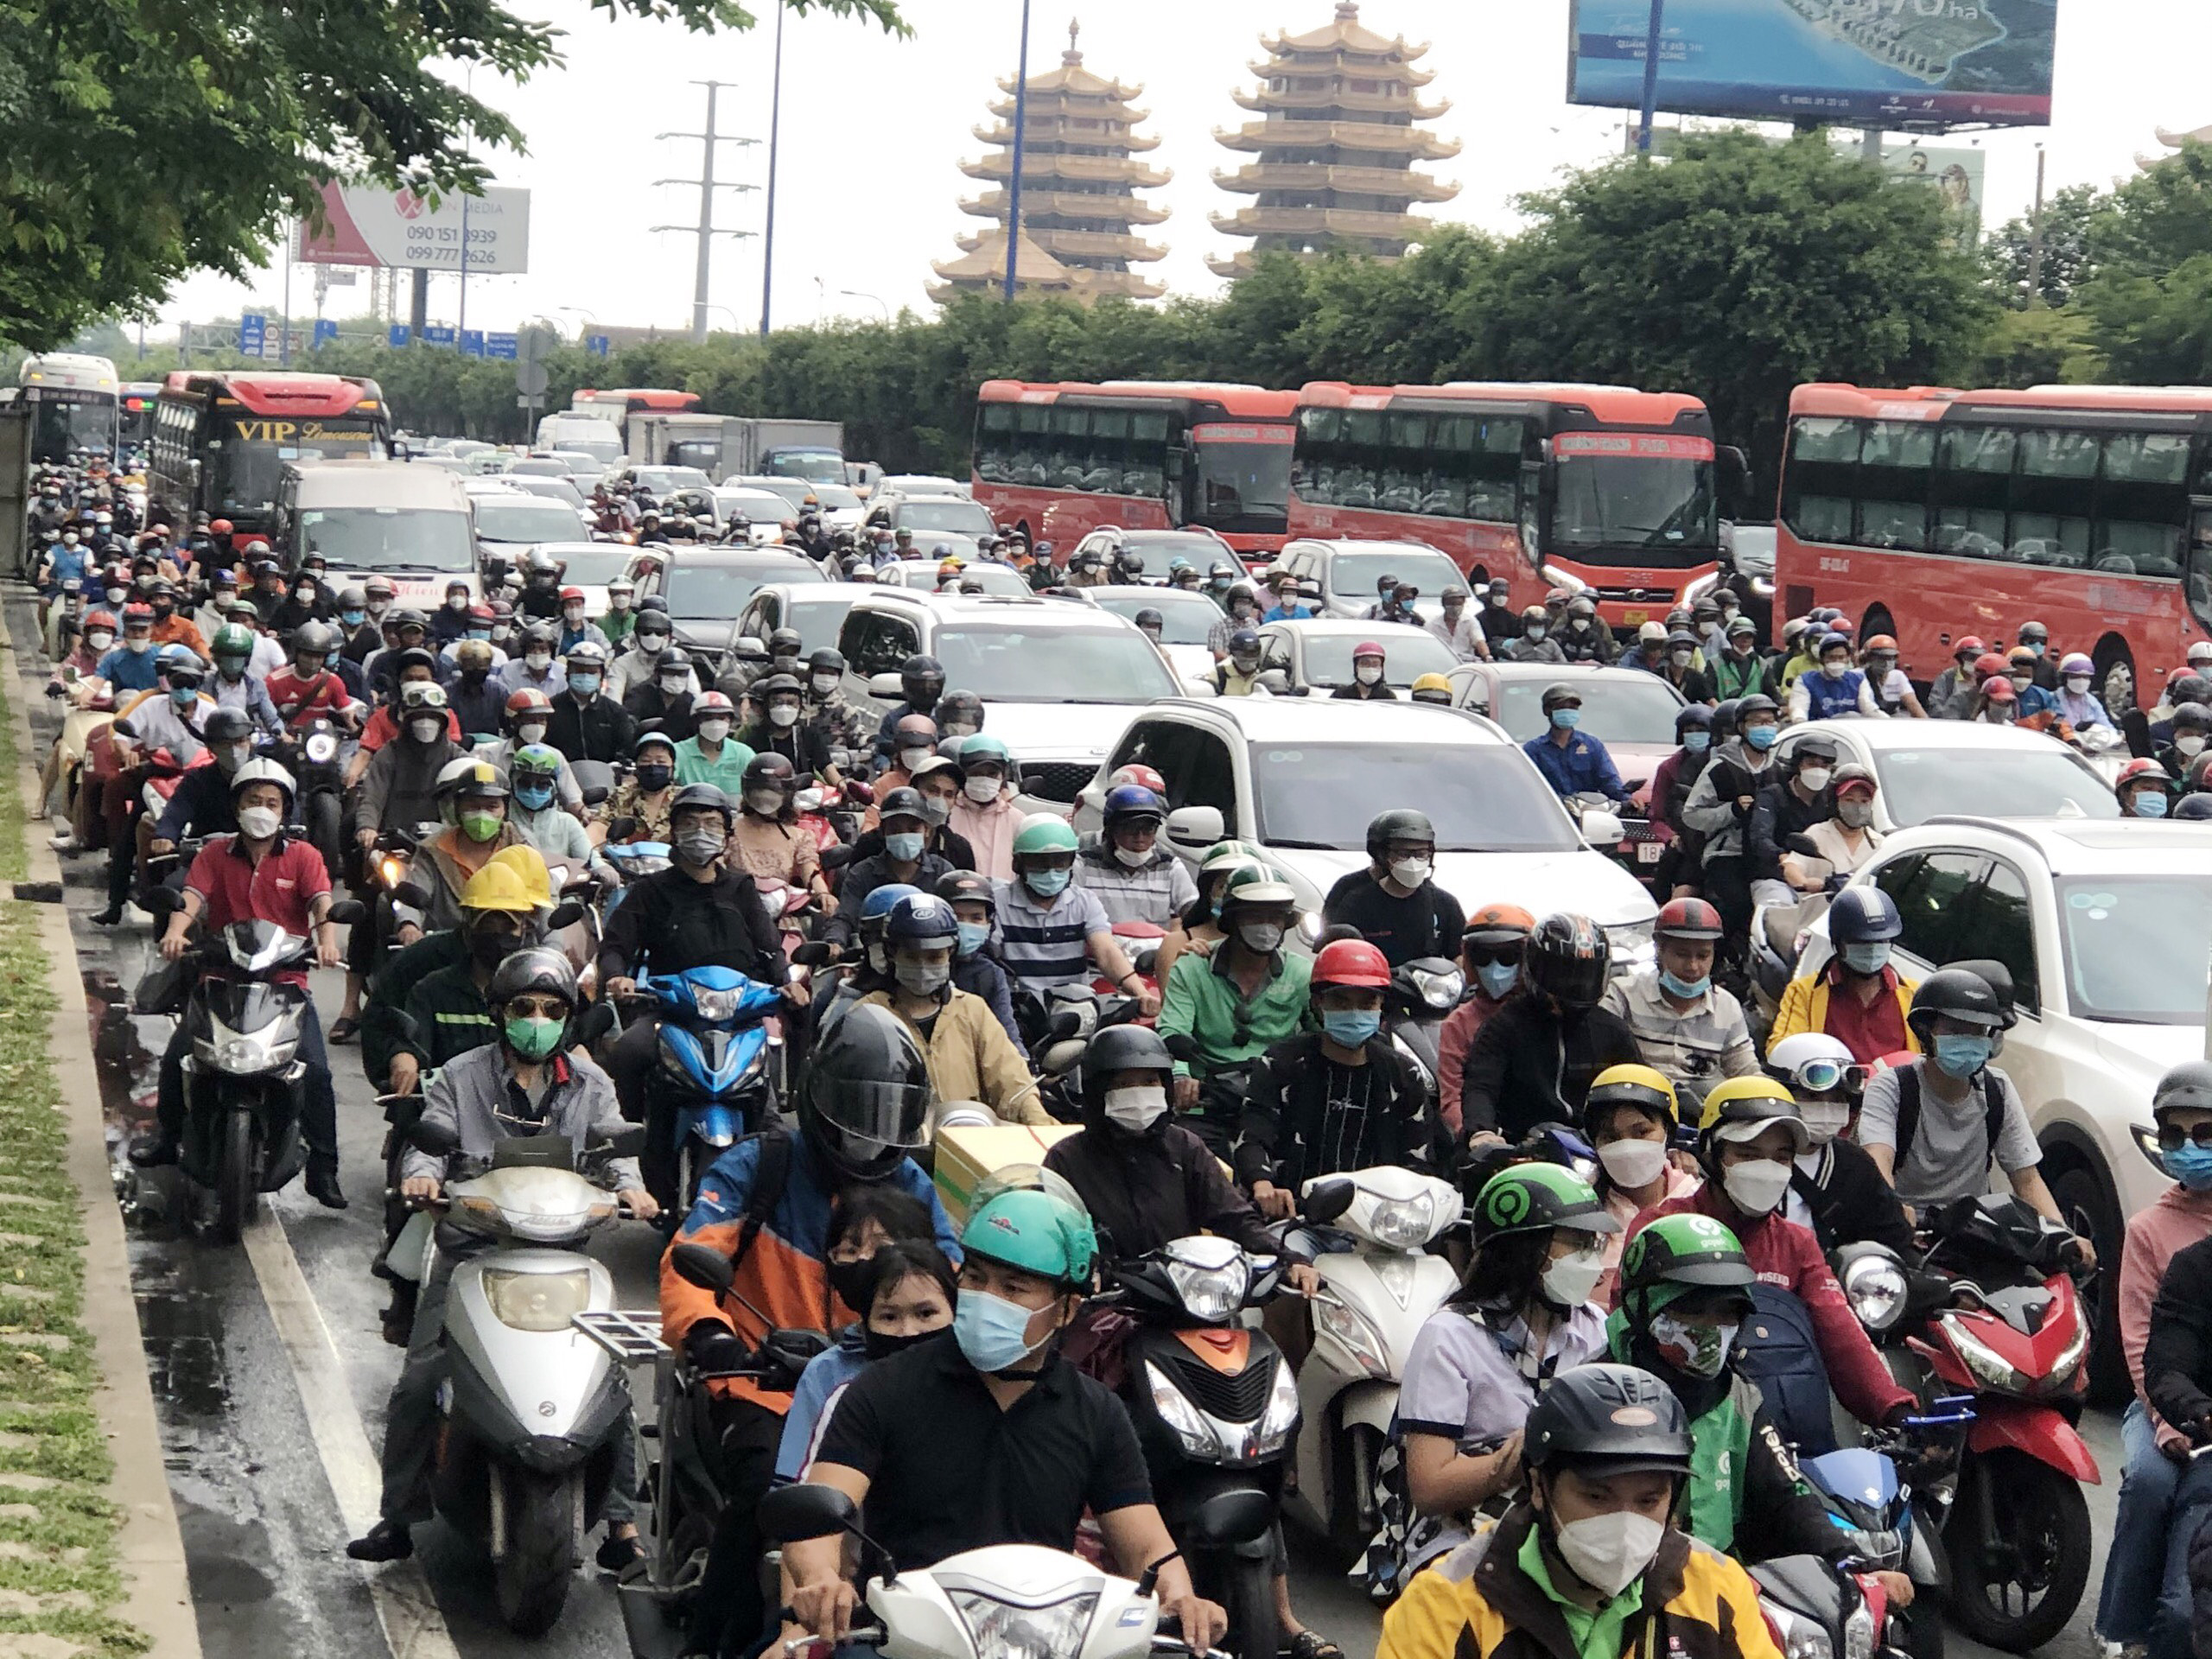 The line of cars followed each other back to their hometown for the holidays of April 30 and May 1, the roads of Hanoi and Ho Chi Minh City were jam-packed - 22